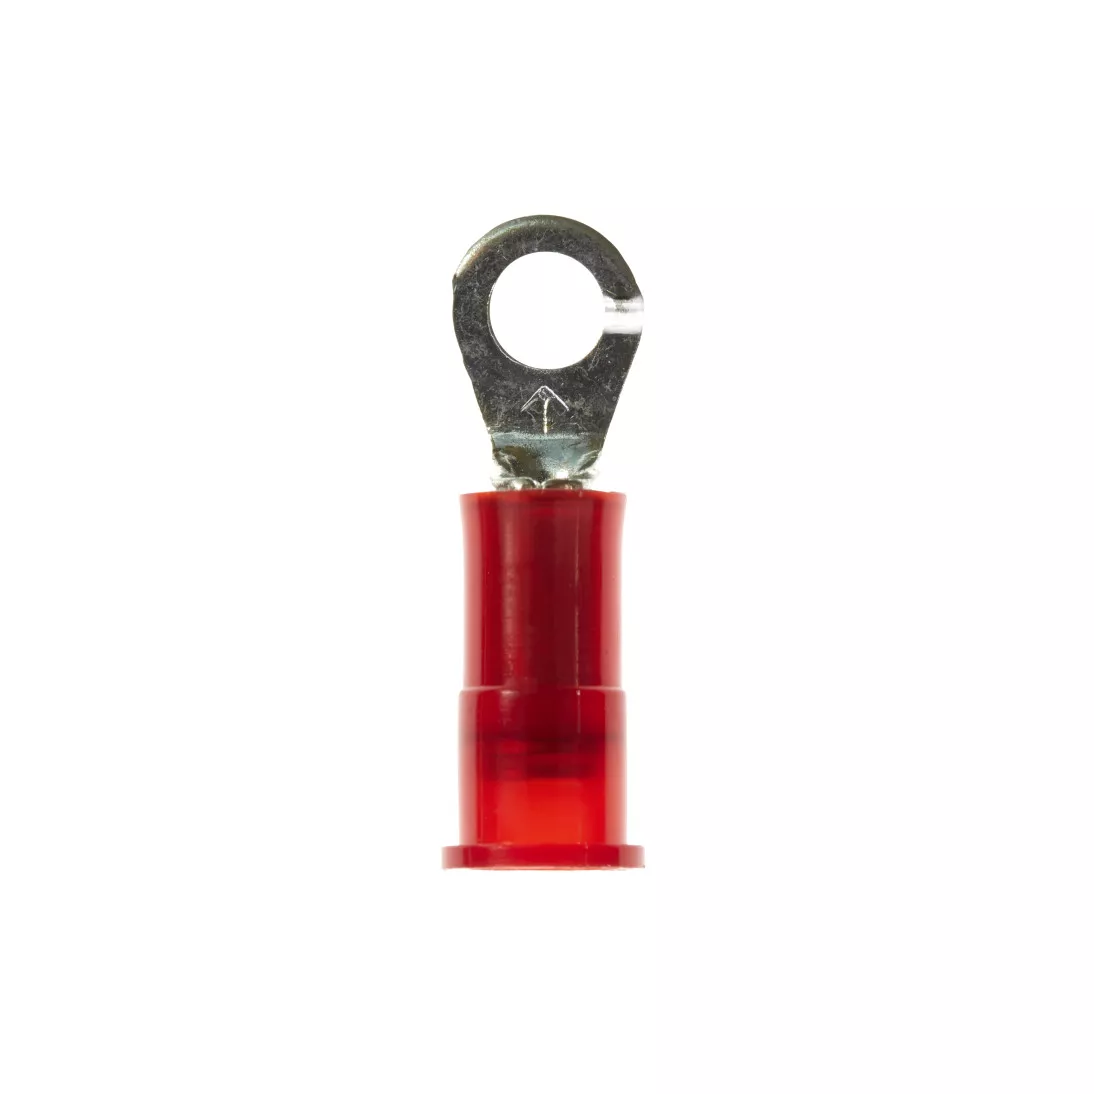 3M™ Scotchlok™ Ring Tongue, Nylon Insulated w/Insulation Grip
MNG18-6R/SK, Stud Size 6, 100/case